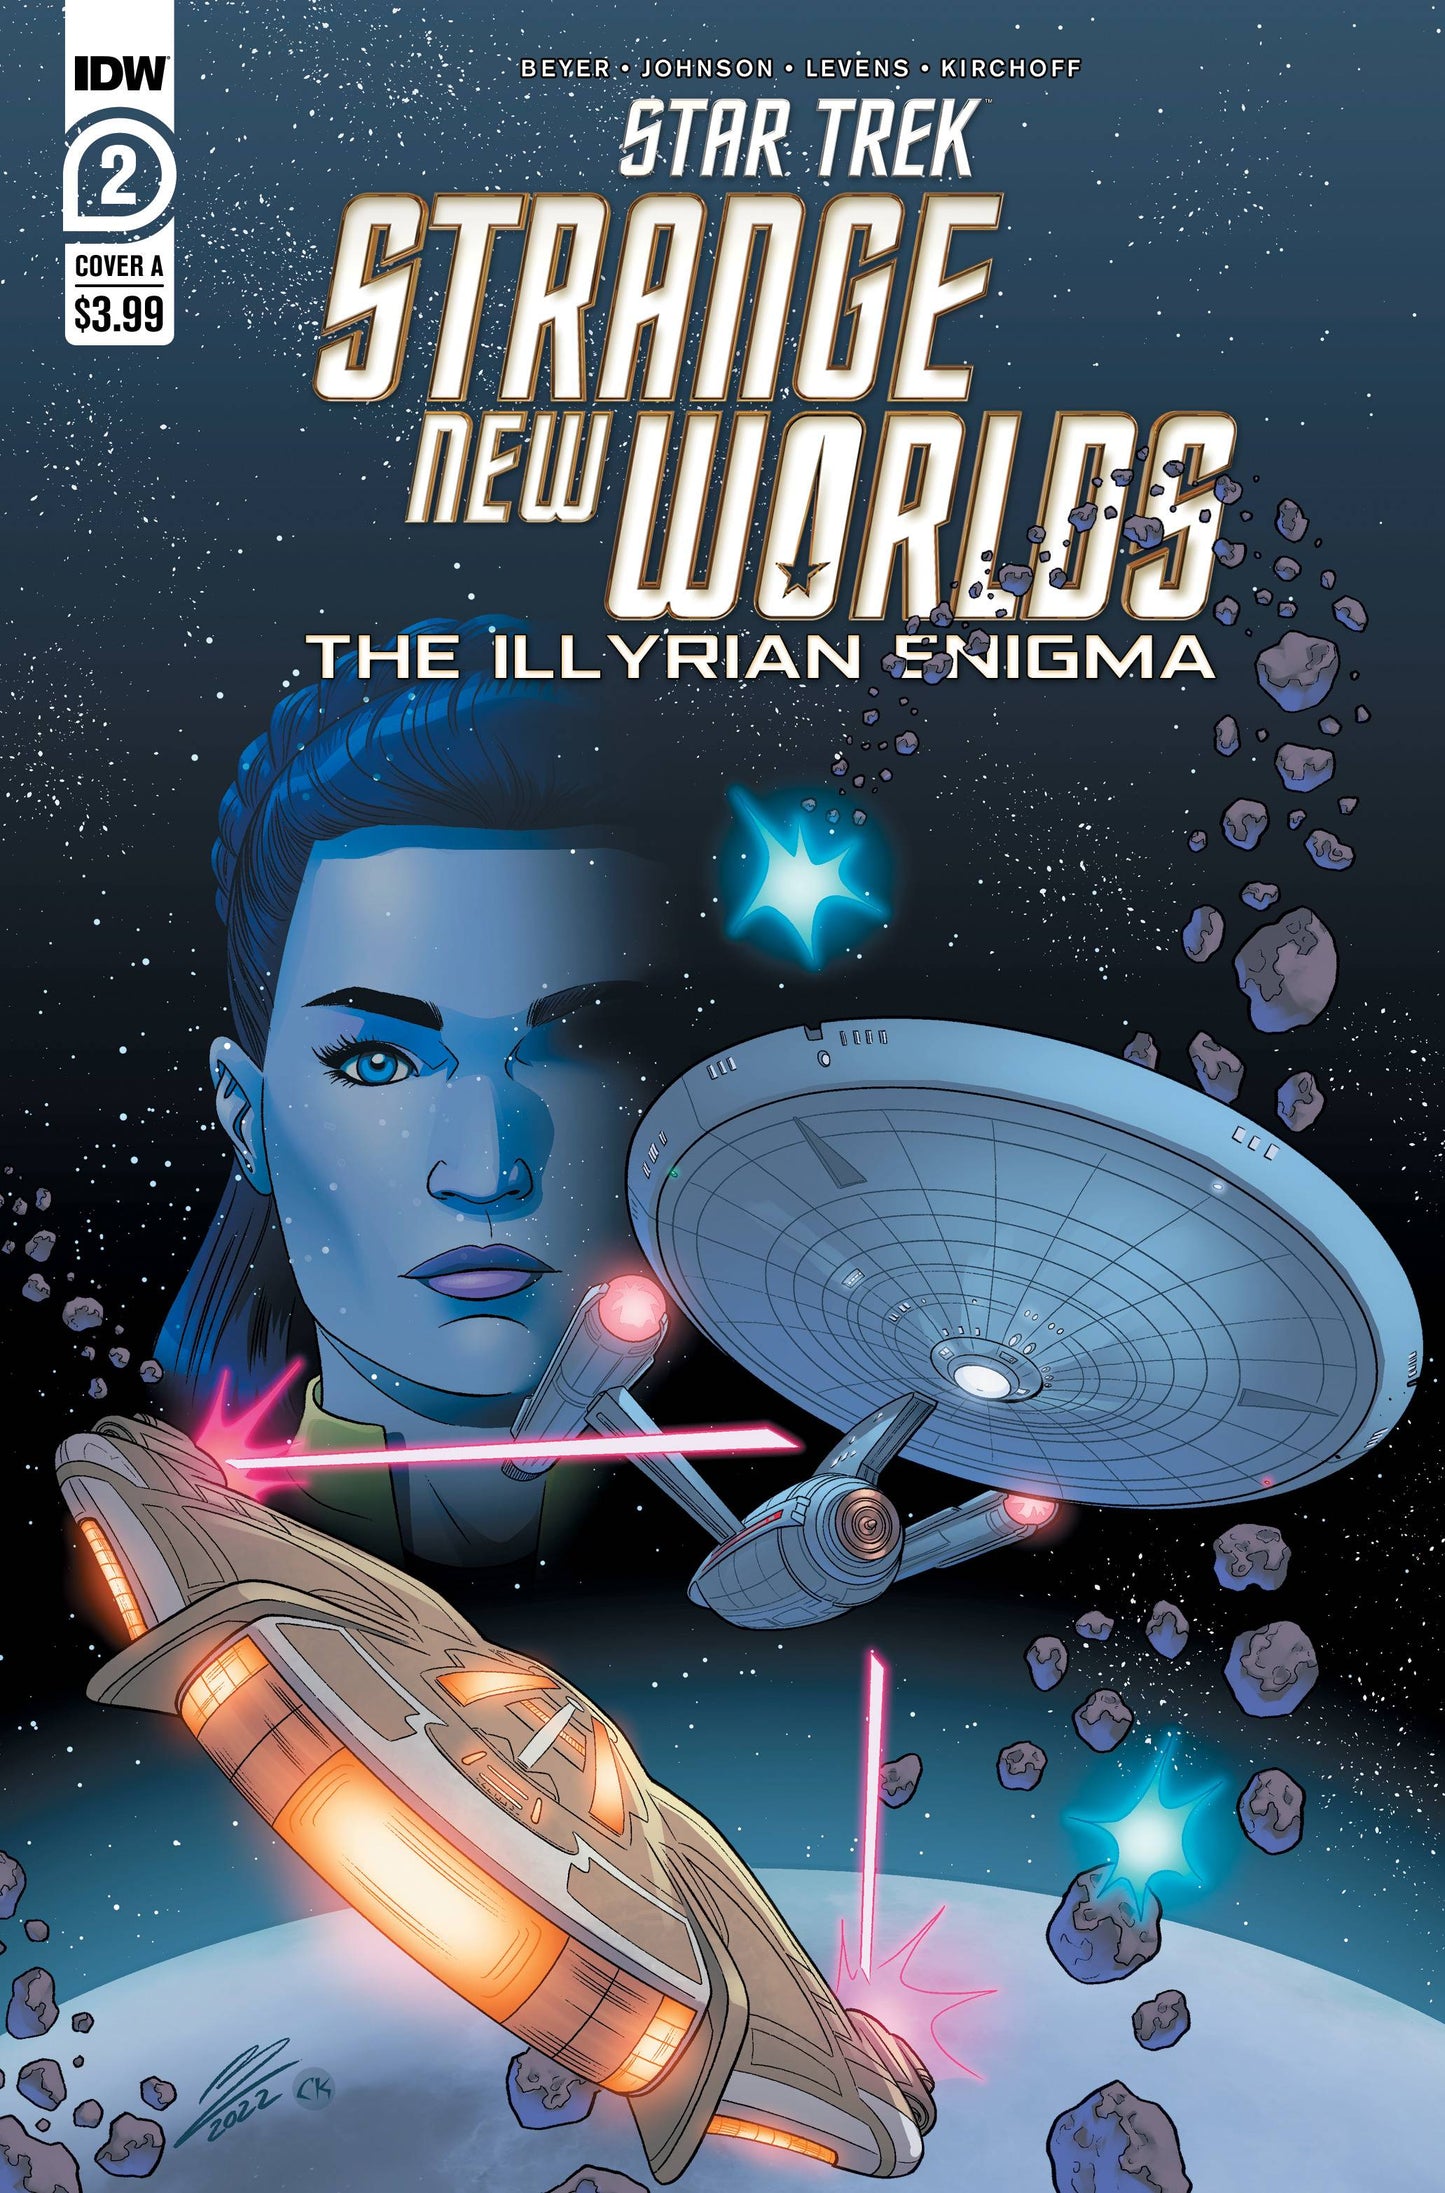 Star Trek Strange New Worlds The Illyrian Enigma #2 Cover A Levens